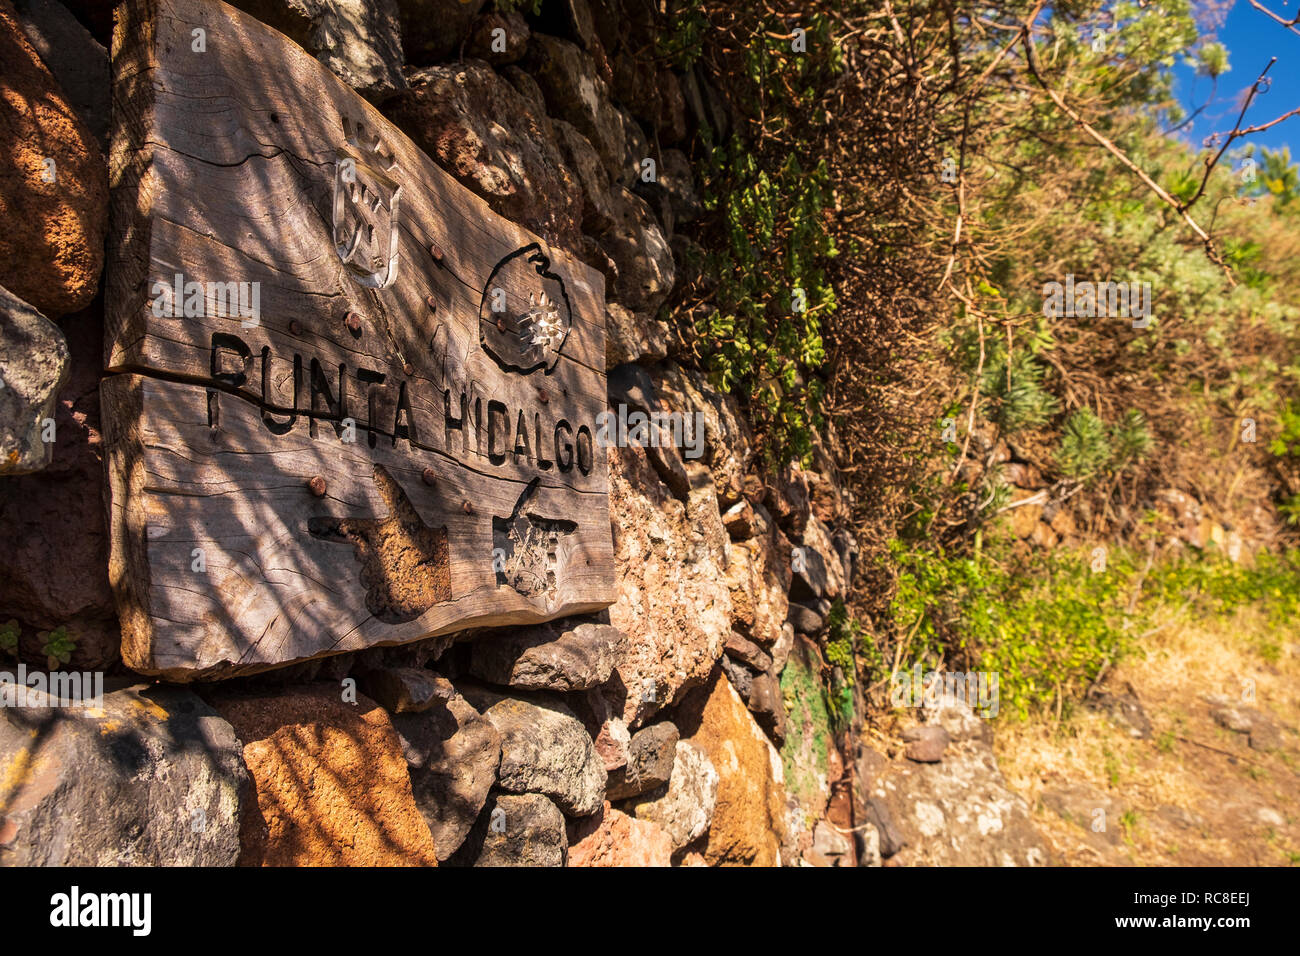 Old carved wooden direction sign on the walking route to Punta Hidalgo from El Batan, Anaga, Tenerife, Canary Islands, Spain Stock Photo